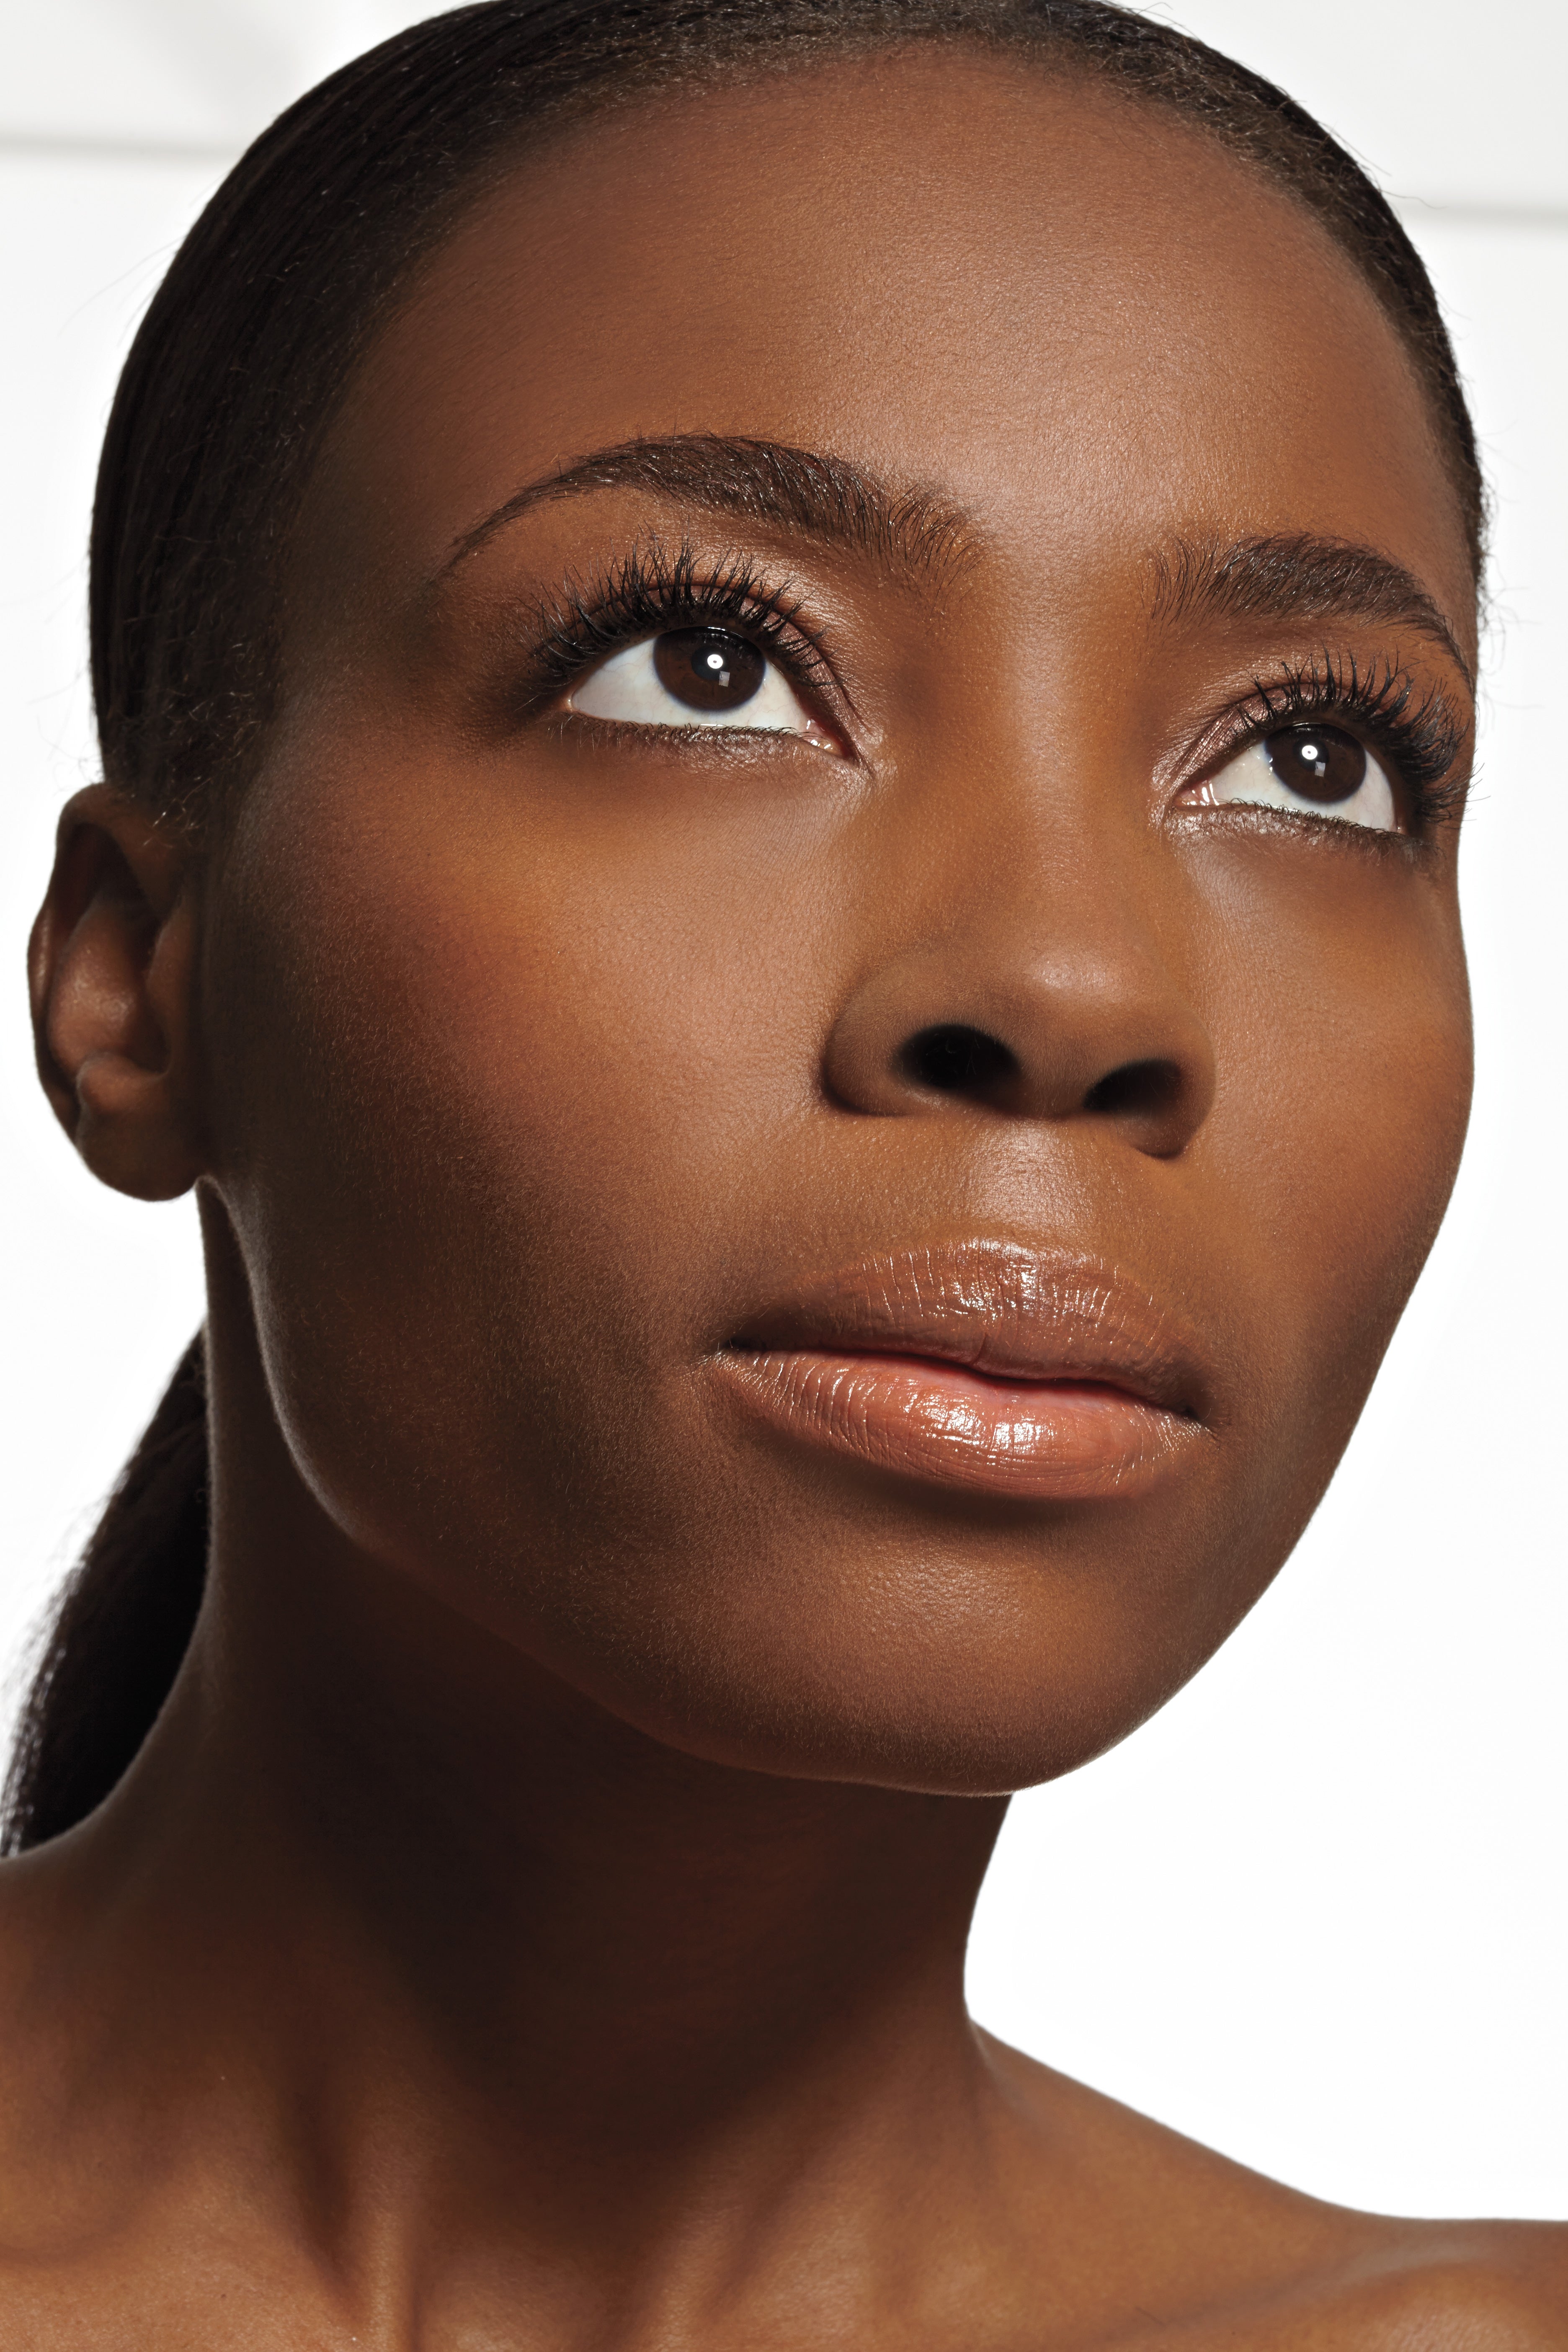 Check Out ESSENCE.com's New Beauty Channel for Tips to Get Glowing Skin In Your 20s, 30s, 40s & Beyond!